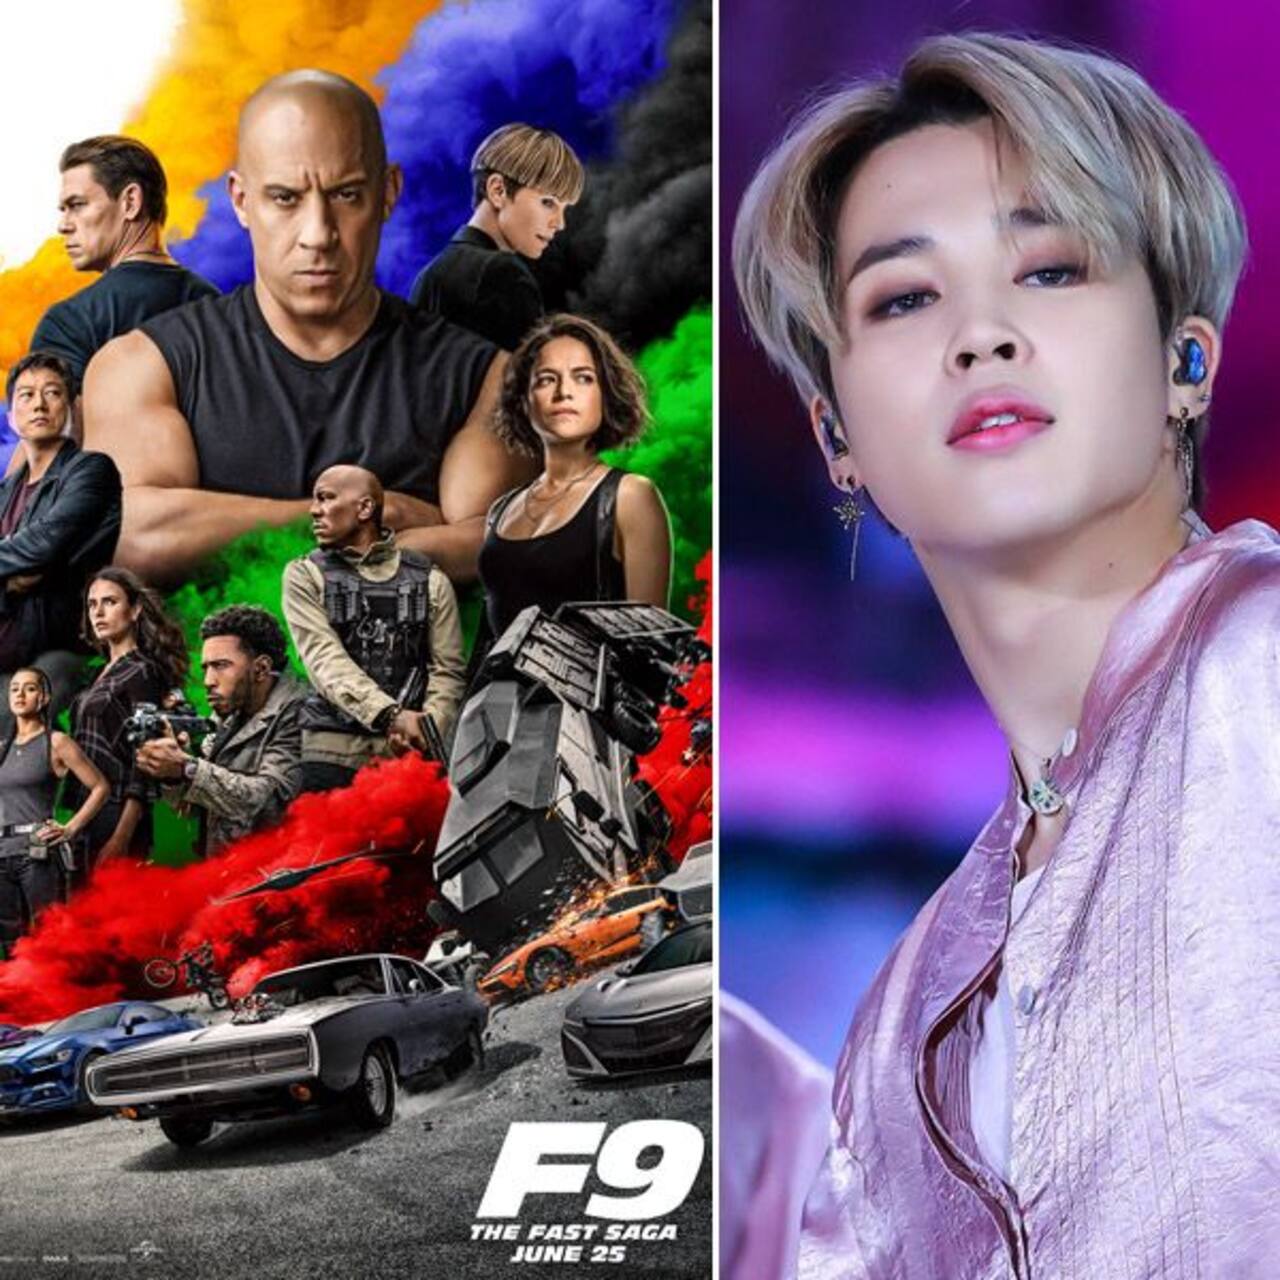 Hollywood News Weekly Rewind: BTS' Butter tops the Billboard Hot 100 chart for the fifth consecutive week, Vin Diesel's Fast and Furious 9 takes the box office by storm and more